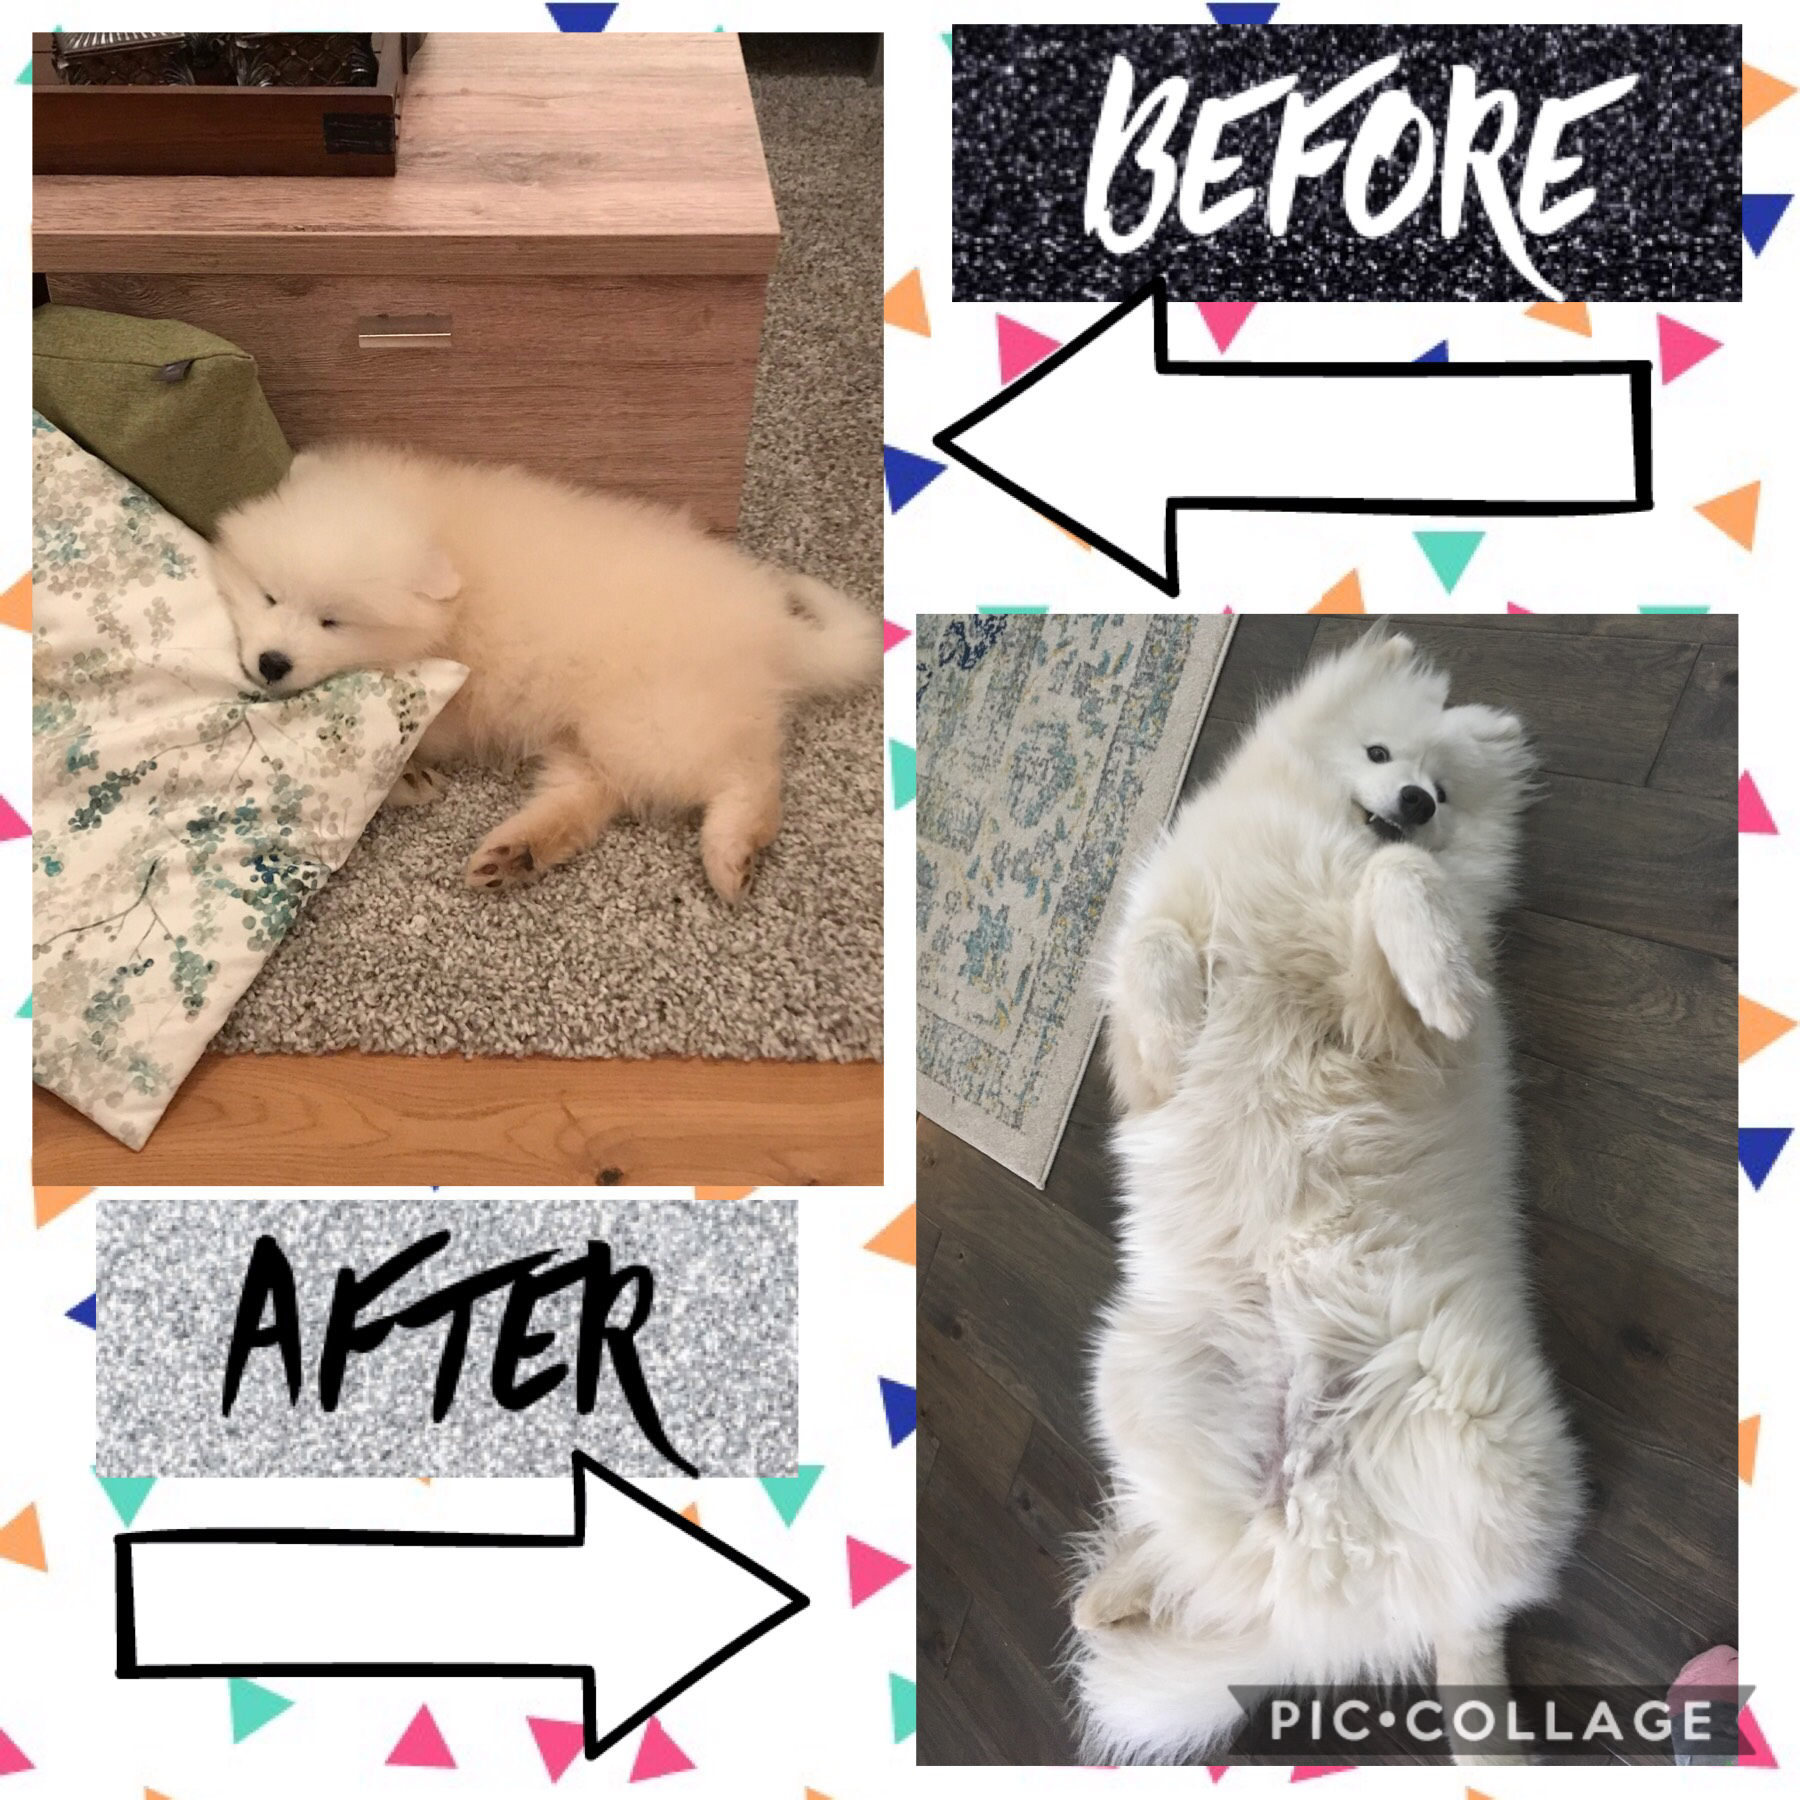 This is my dog before and after 